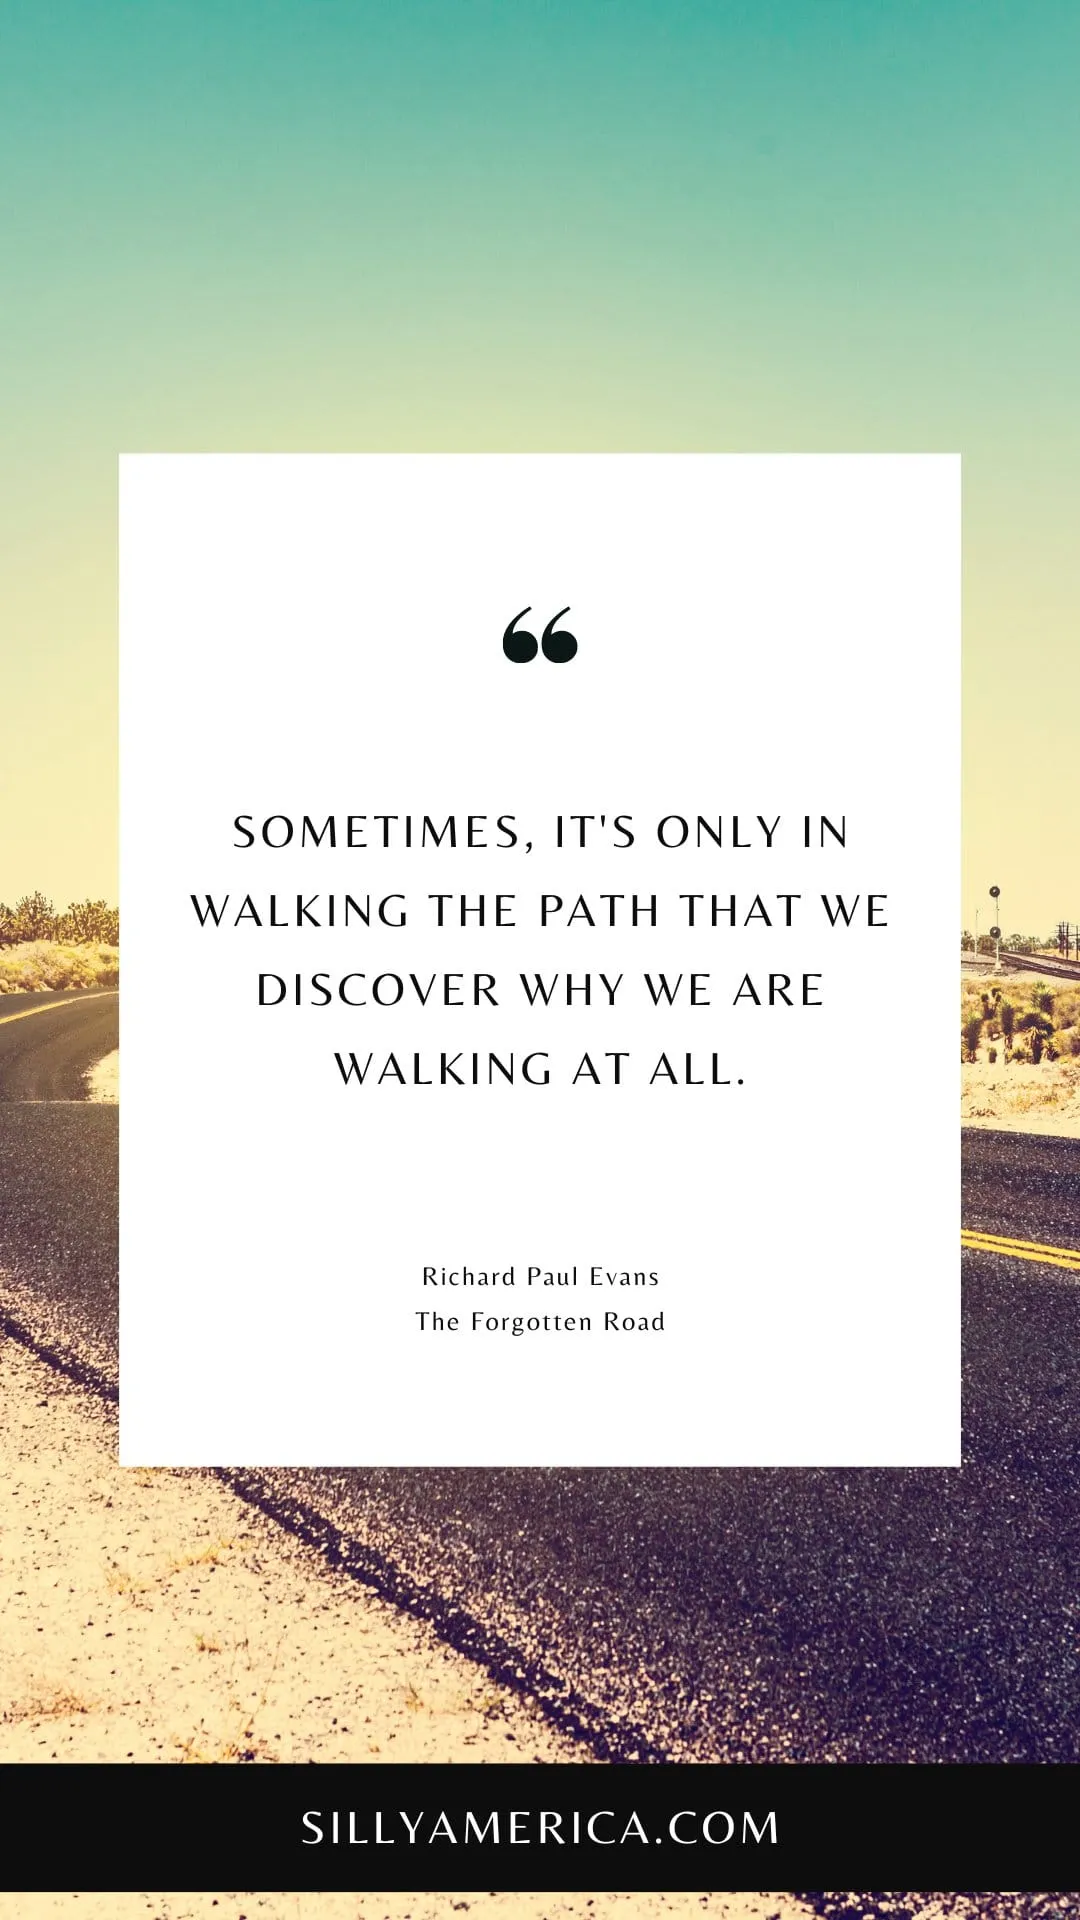 Route 66 Quotes, Sayings, and Phrases - Sometimes, it's only in walking the path that we discover why we are walking at all. - Richard Paul Evans, The Forgotten Road